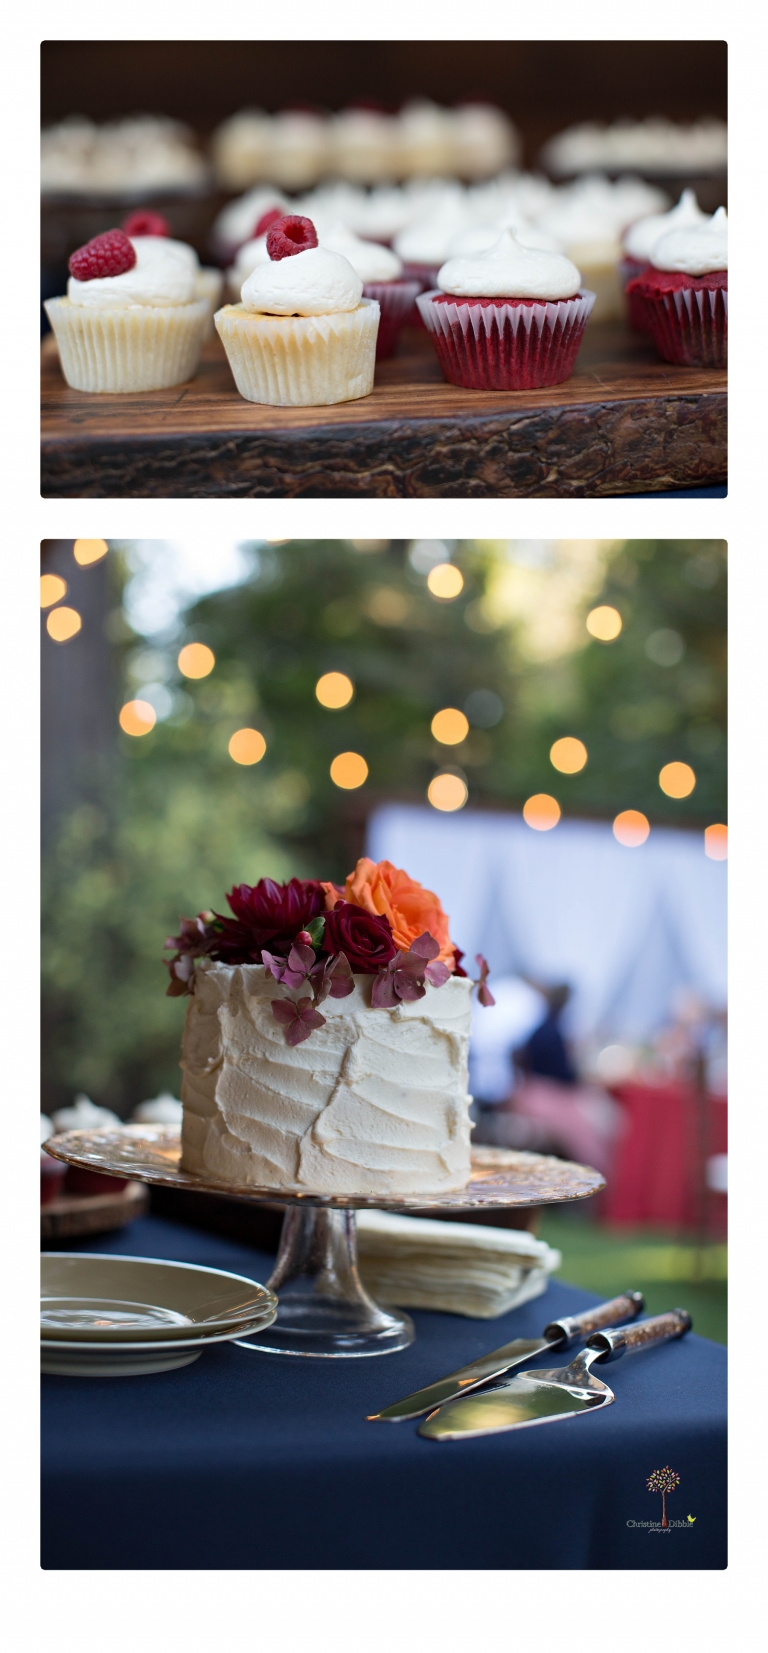 Sonora and Arnold wedding photographer Christine Dibble Photography photographs a colorful and fun Fall wedding at Arnold's Black Bear Inn.